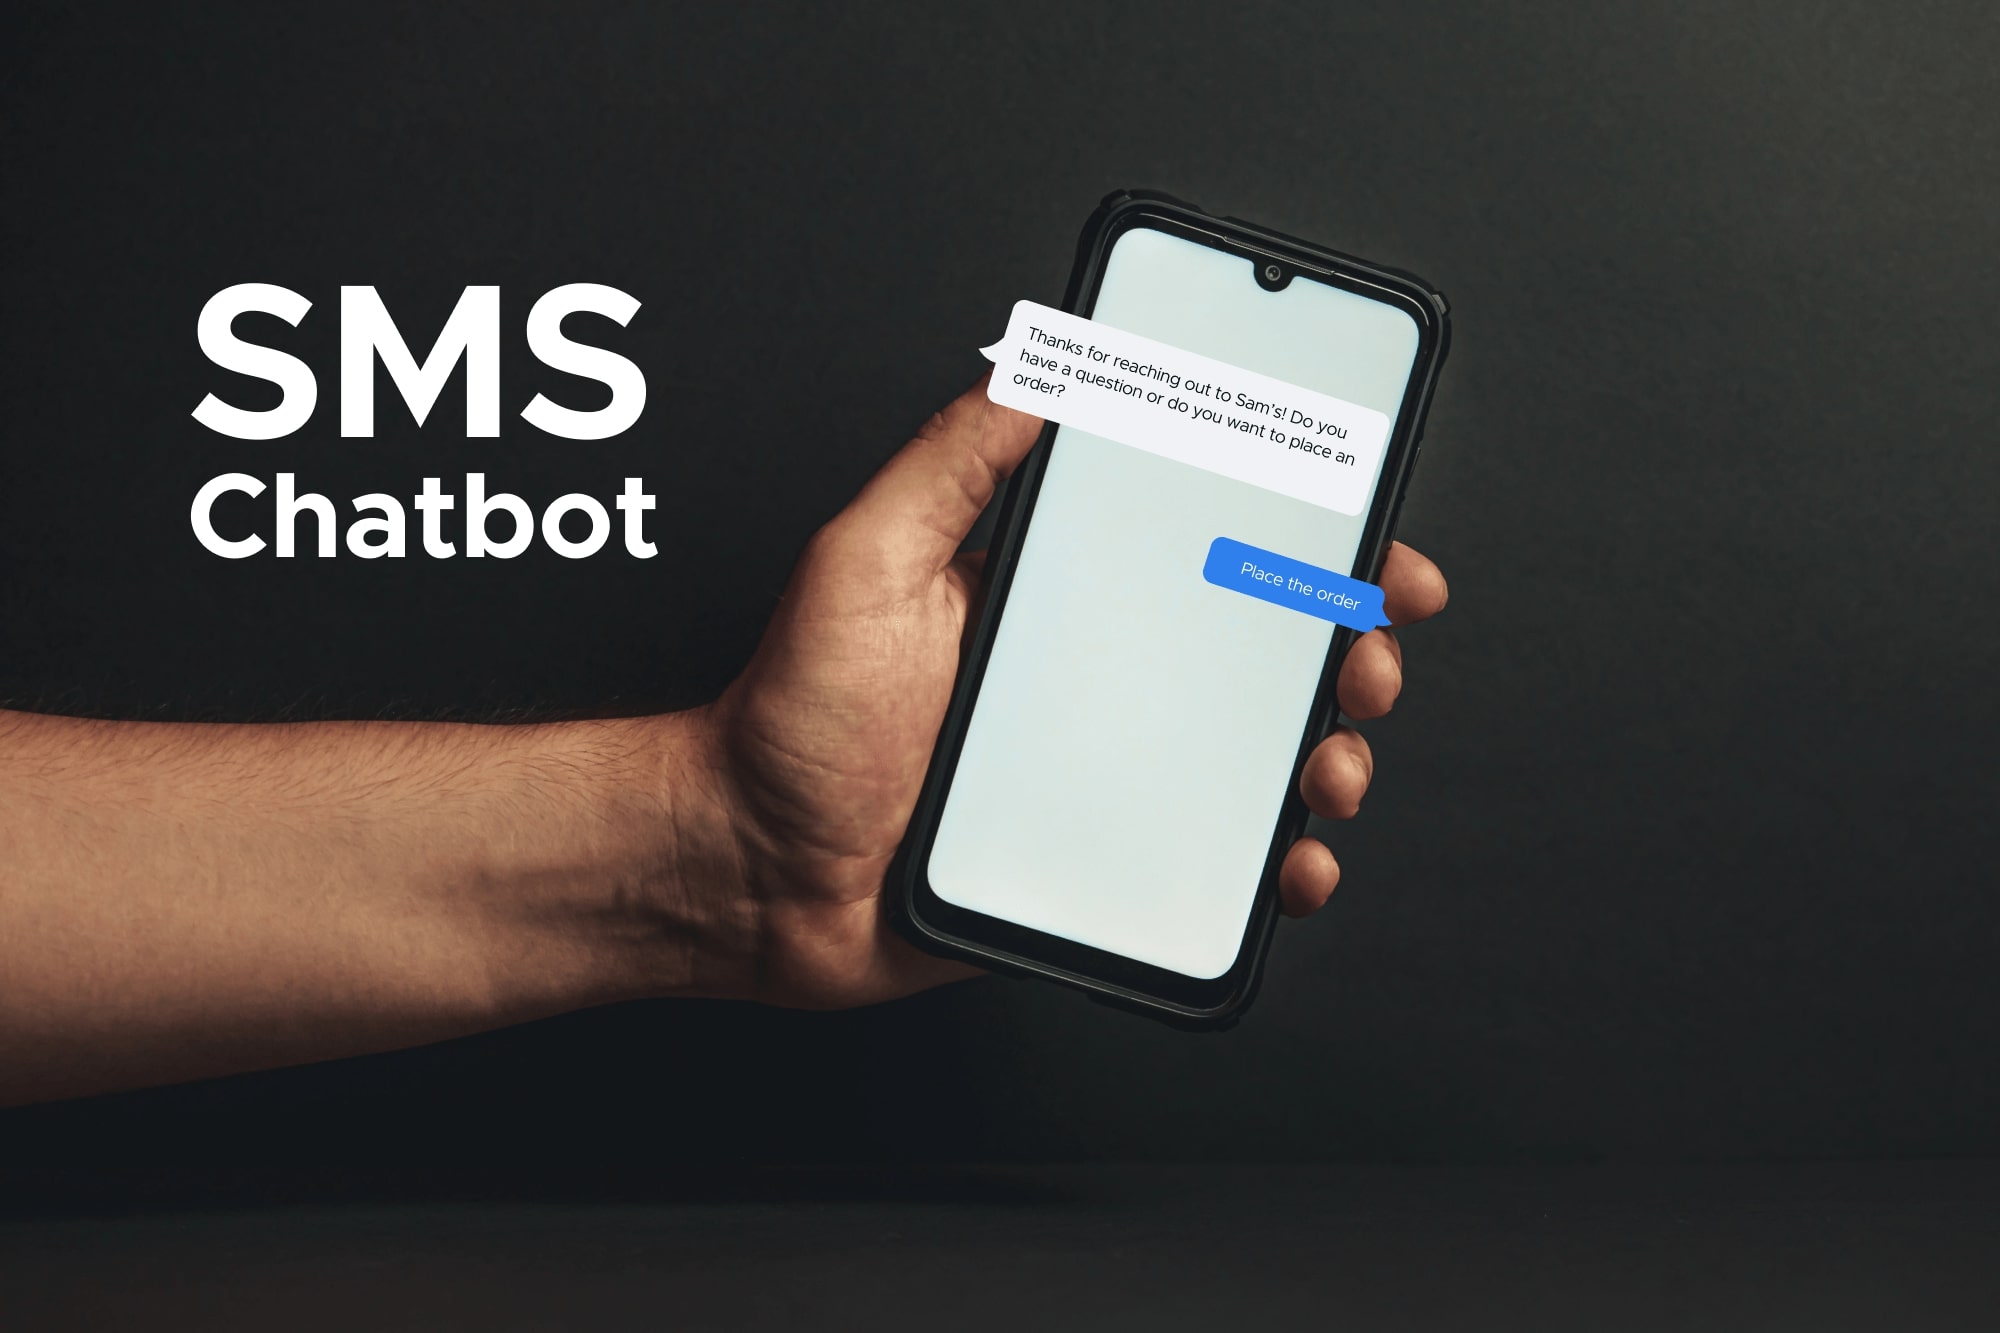 SMS Chatbot: A Complete Guide for Business (+ Use Cases)